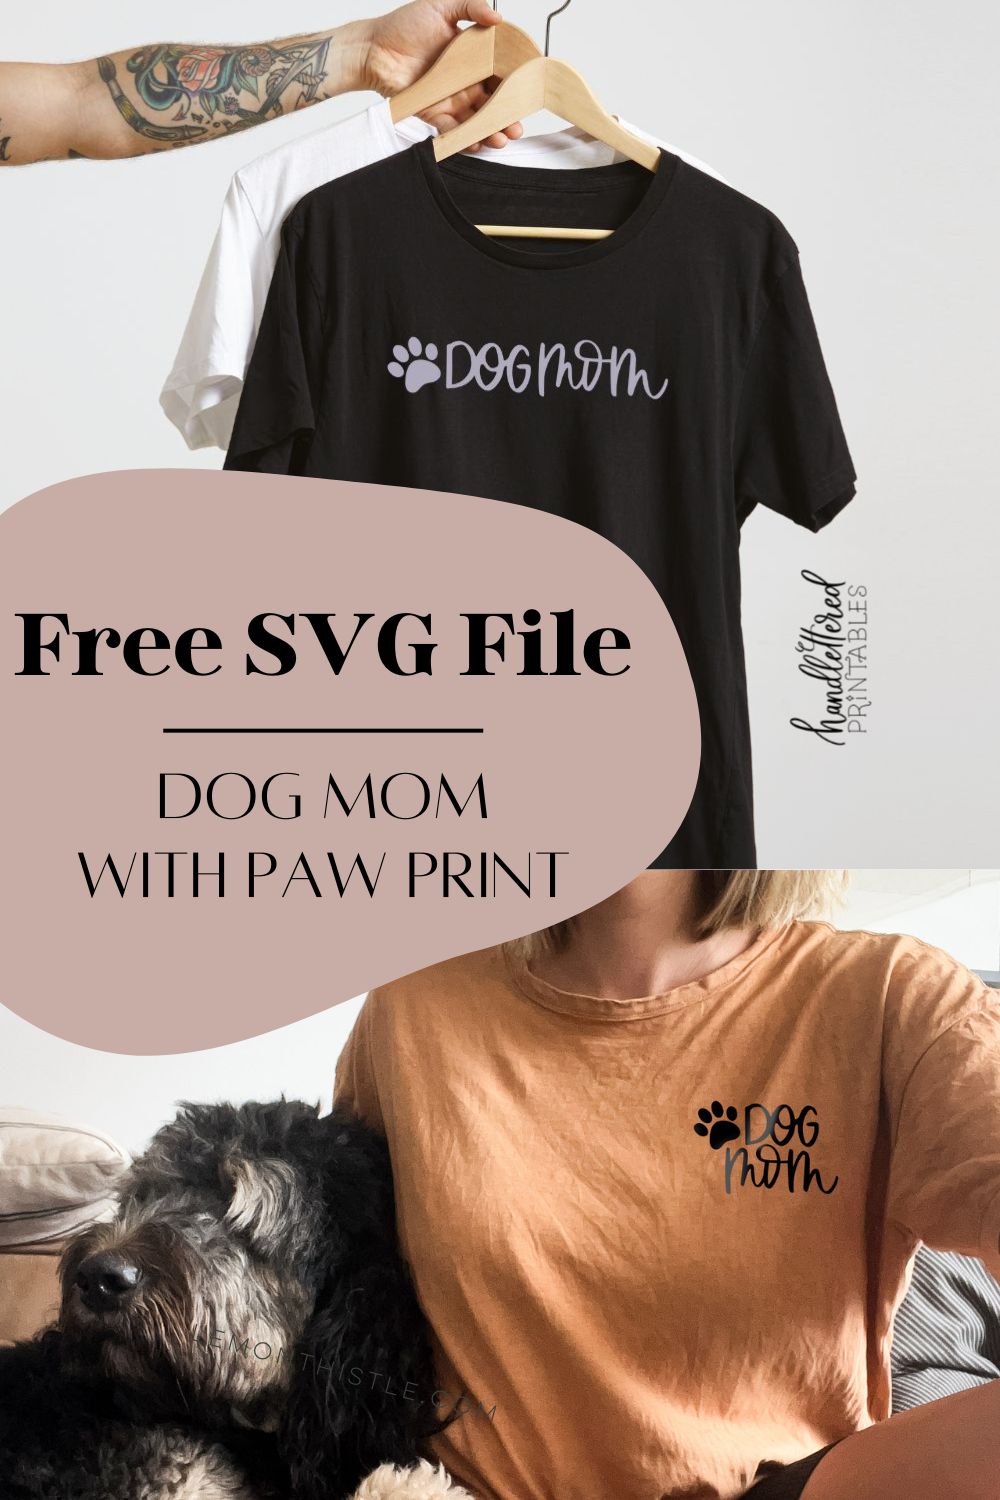 dog mom tee free svg file for download. text over reads: Free SVG File: Dog mom with paw print, images of two different styles of shirts made with the design and iron on vinyl